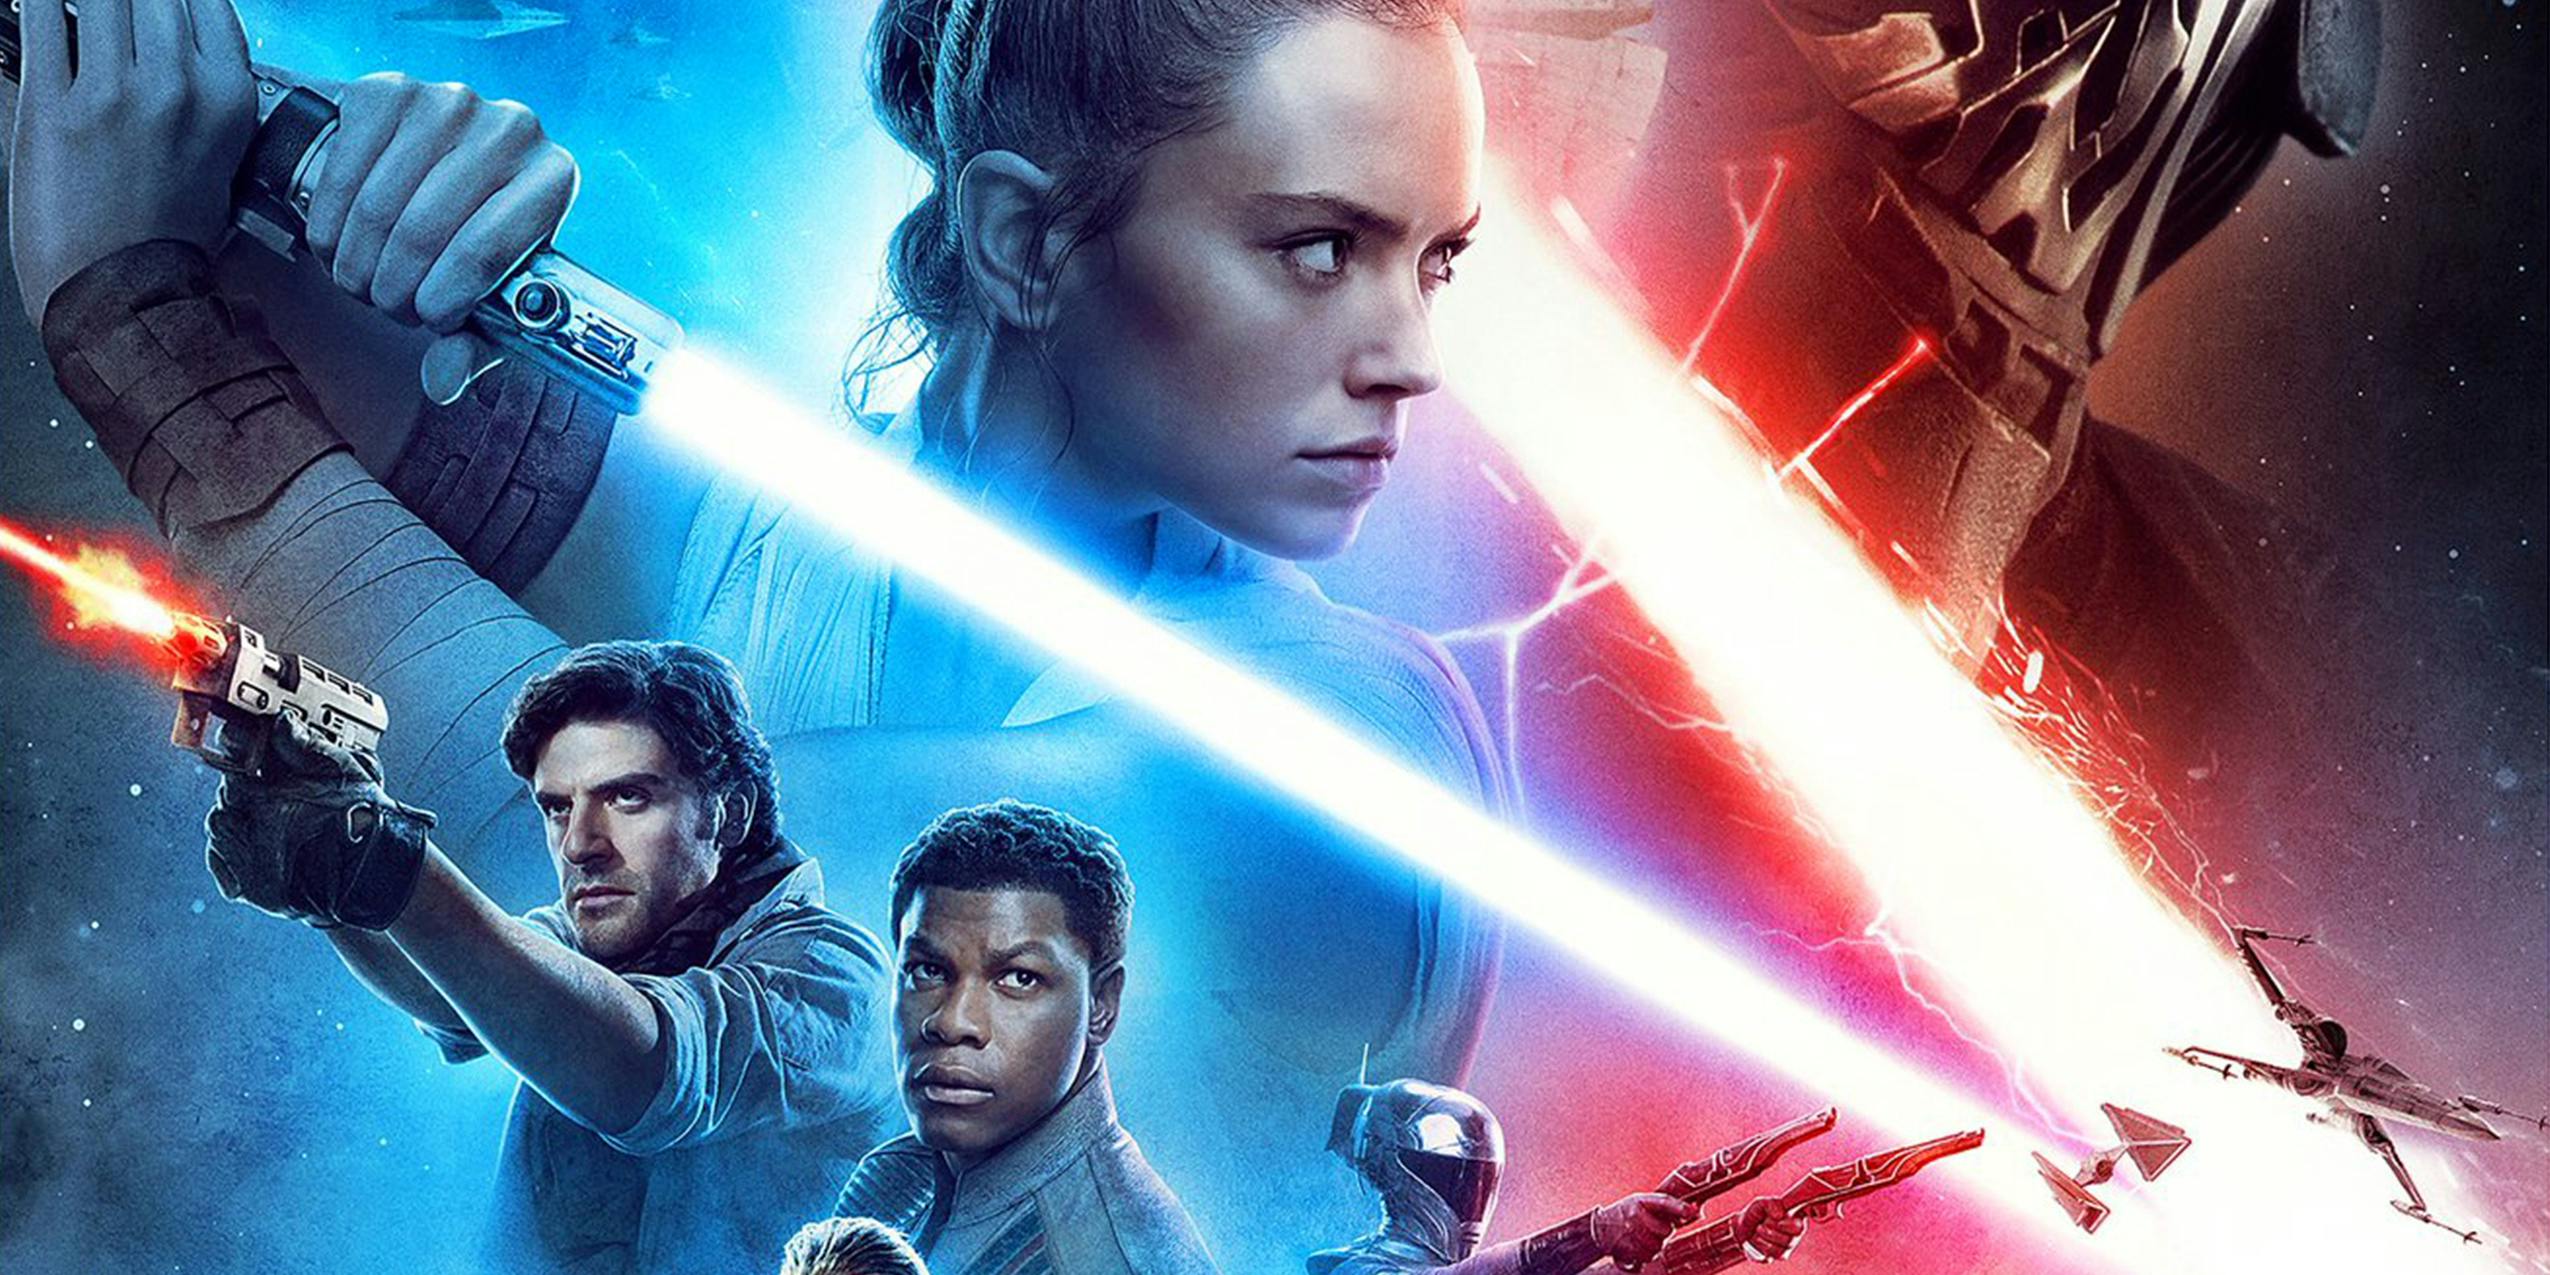 How to watch Star Wars: Rise of Skywalker